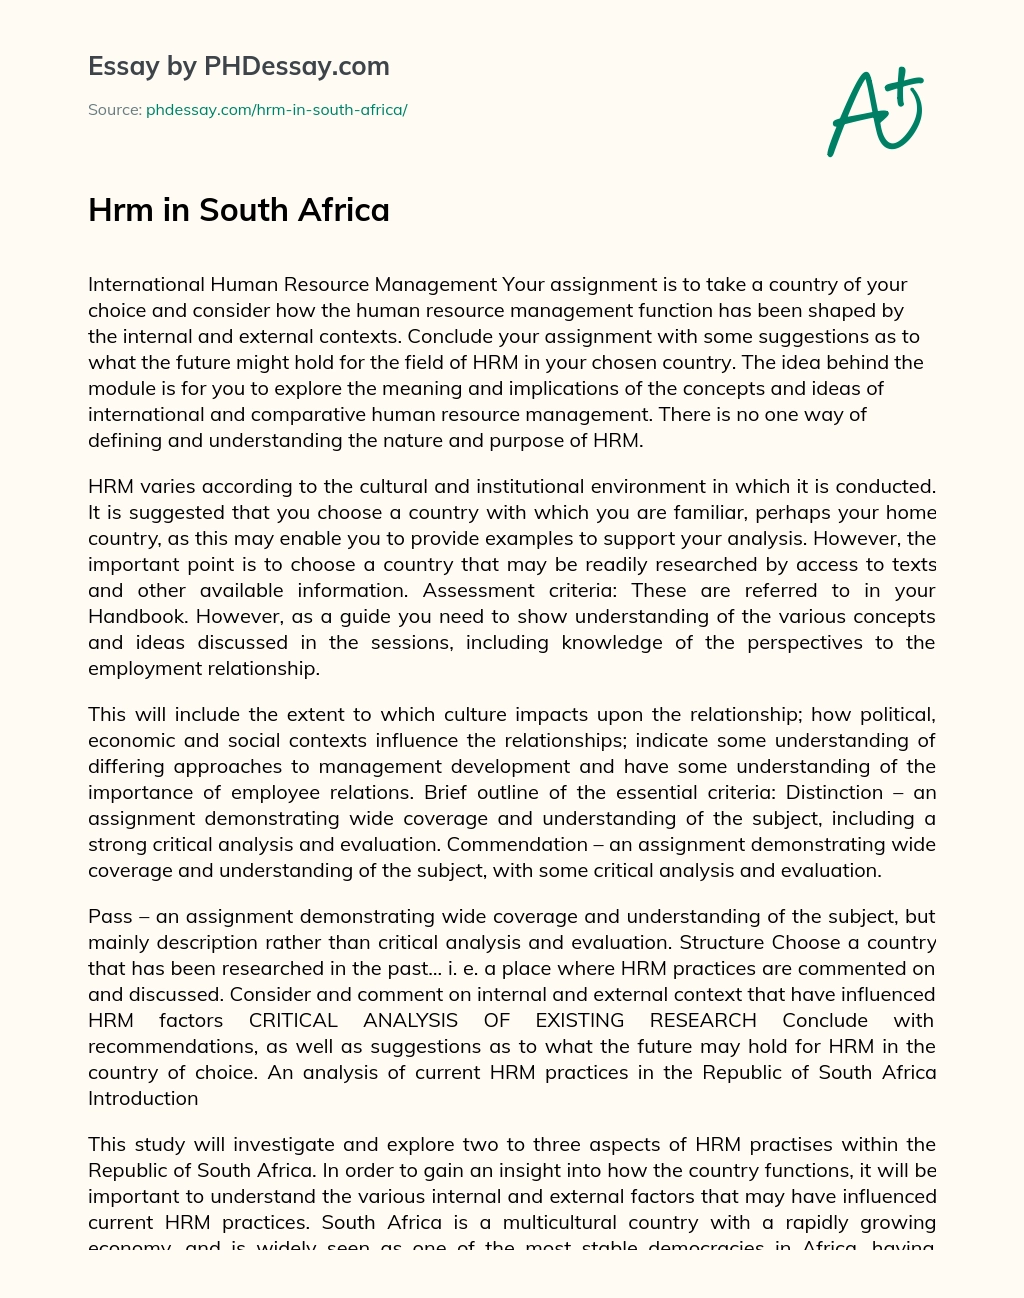 Hrm in South Africa essay